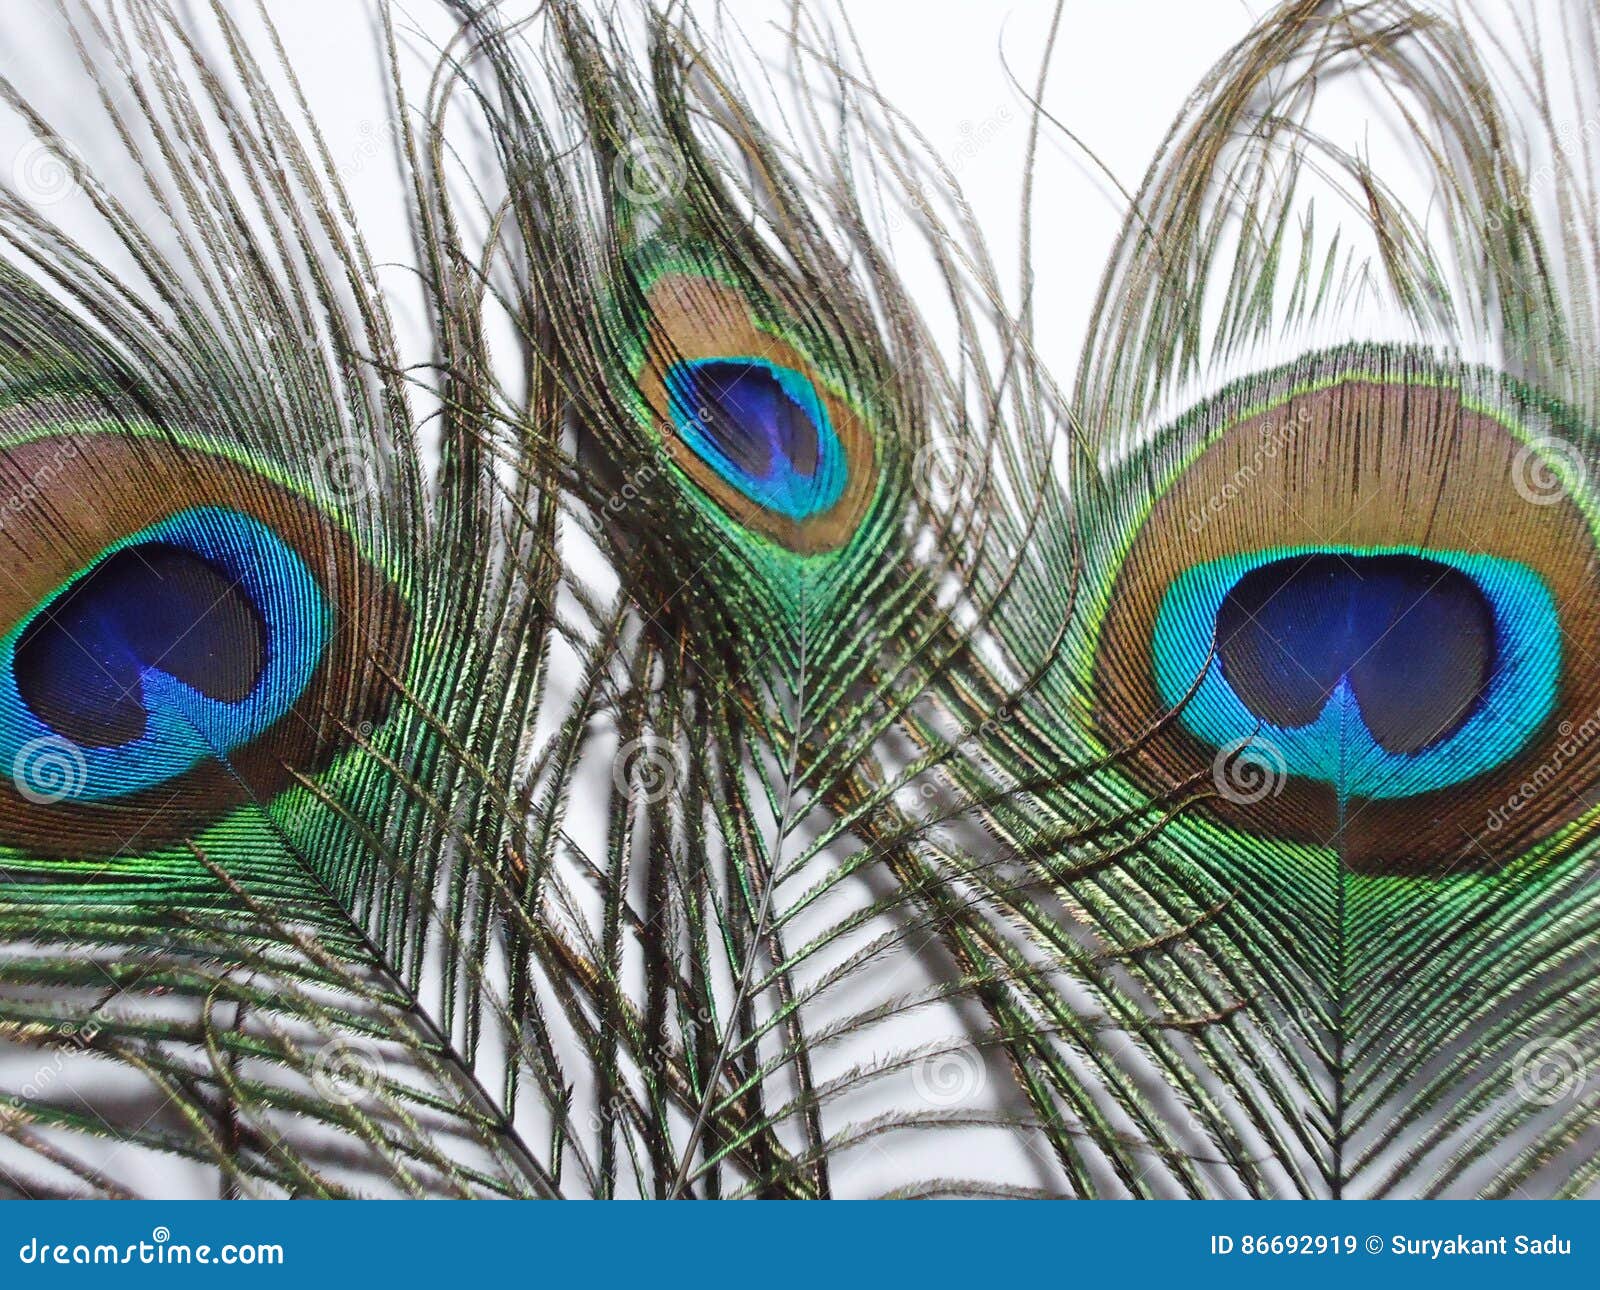 Feathers of Peacock or Peahen Stock Image - Image of beak, indian: 86692919